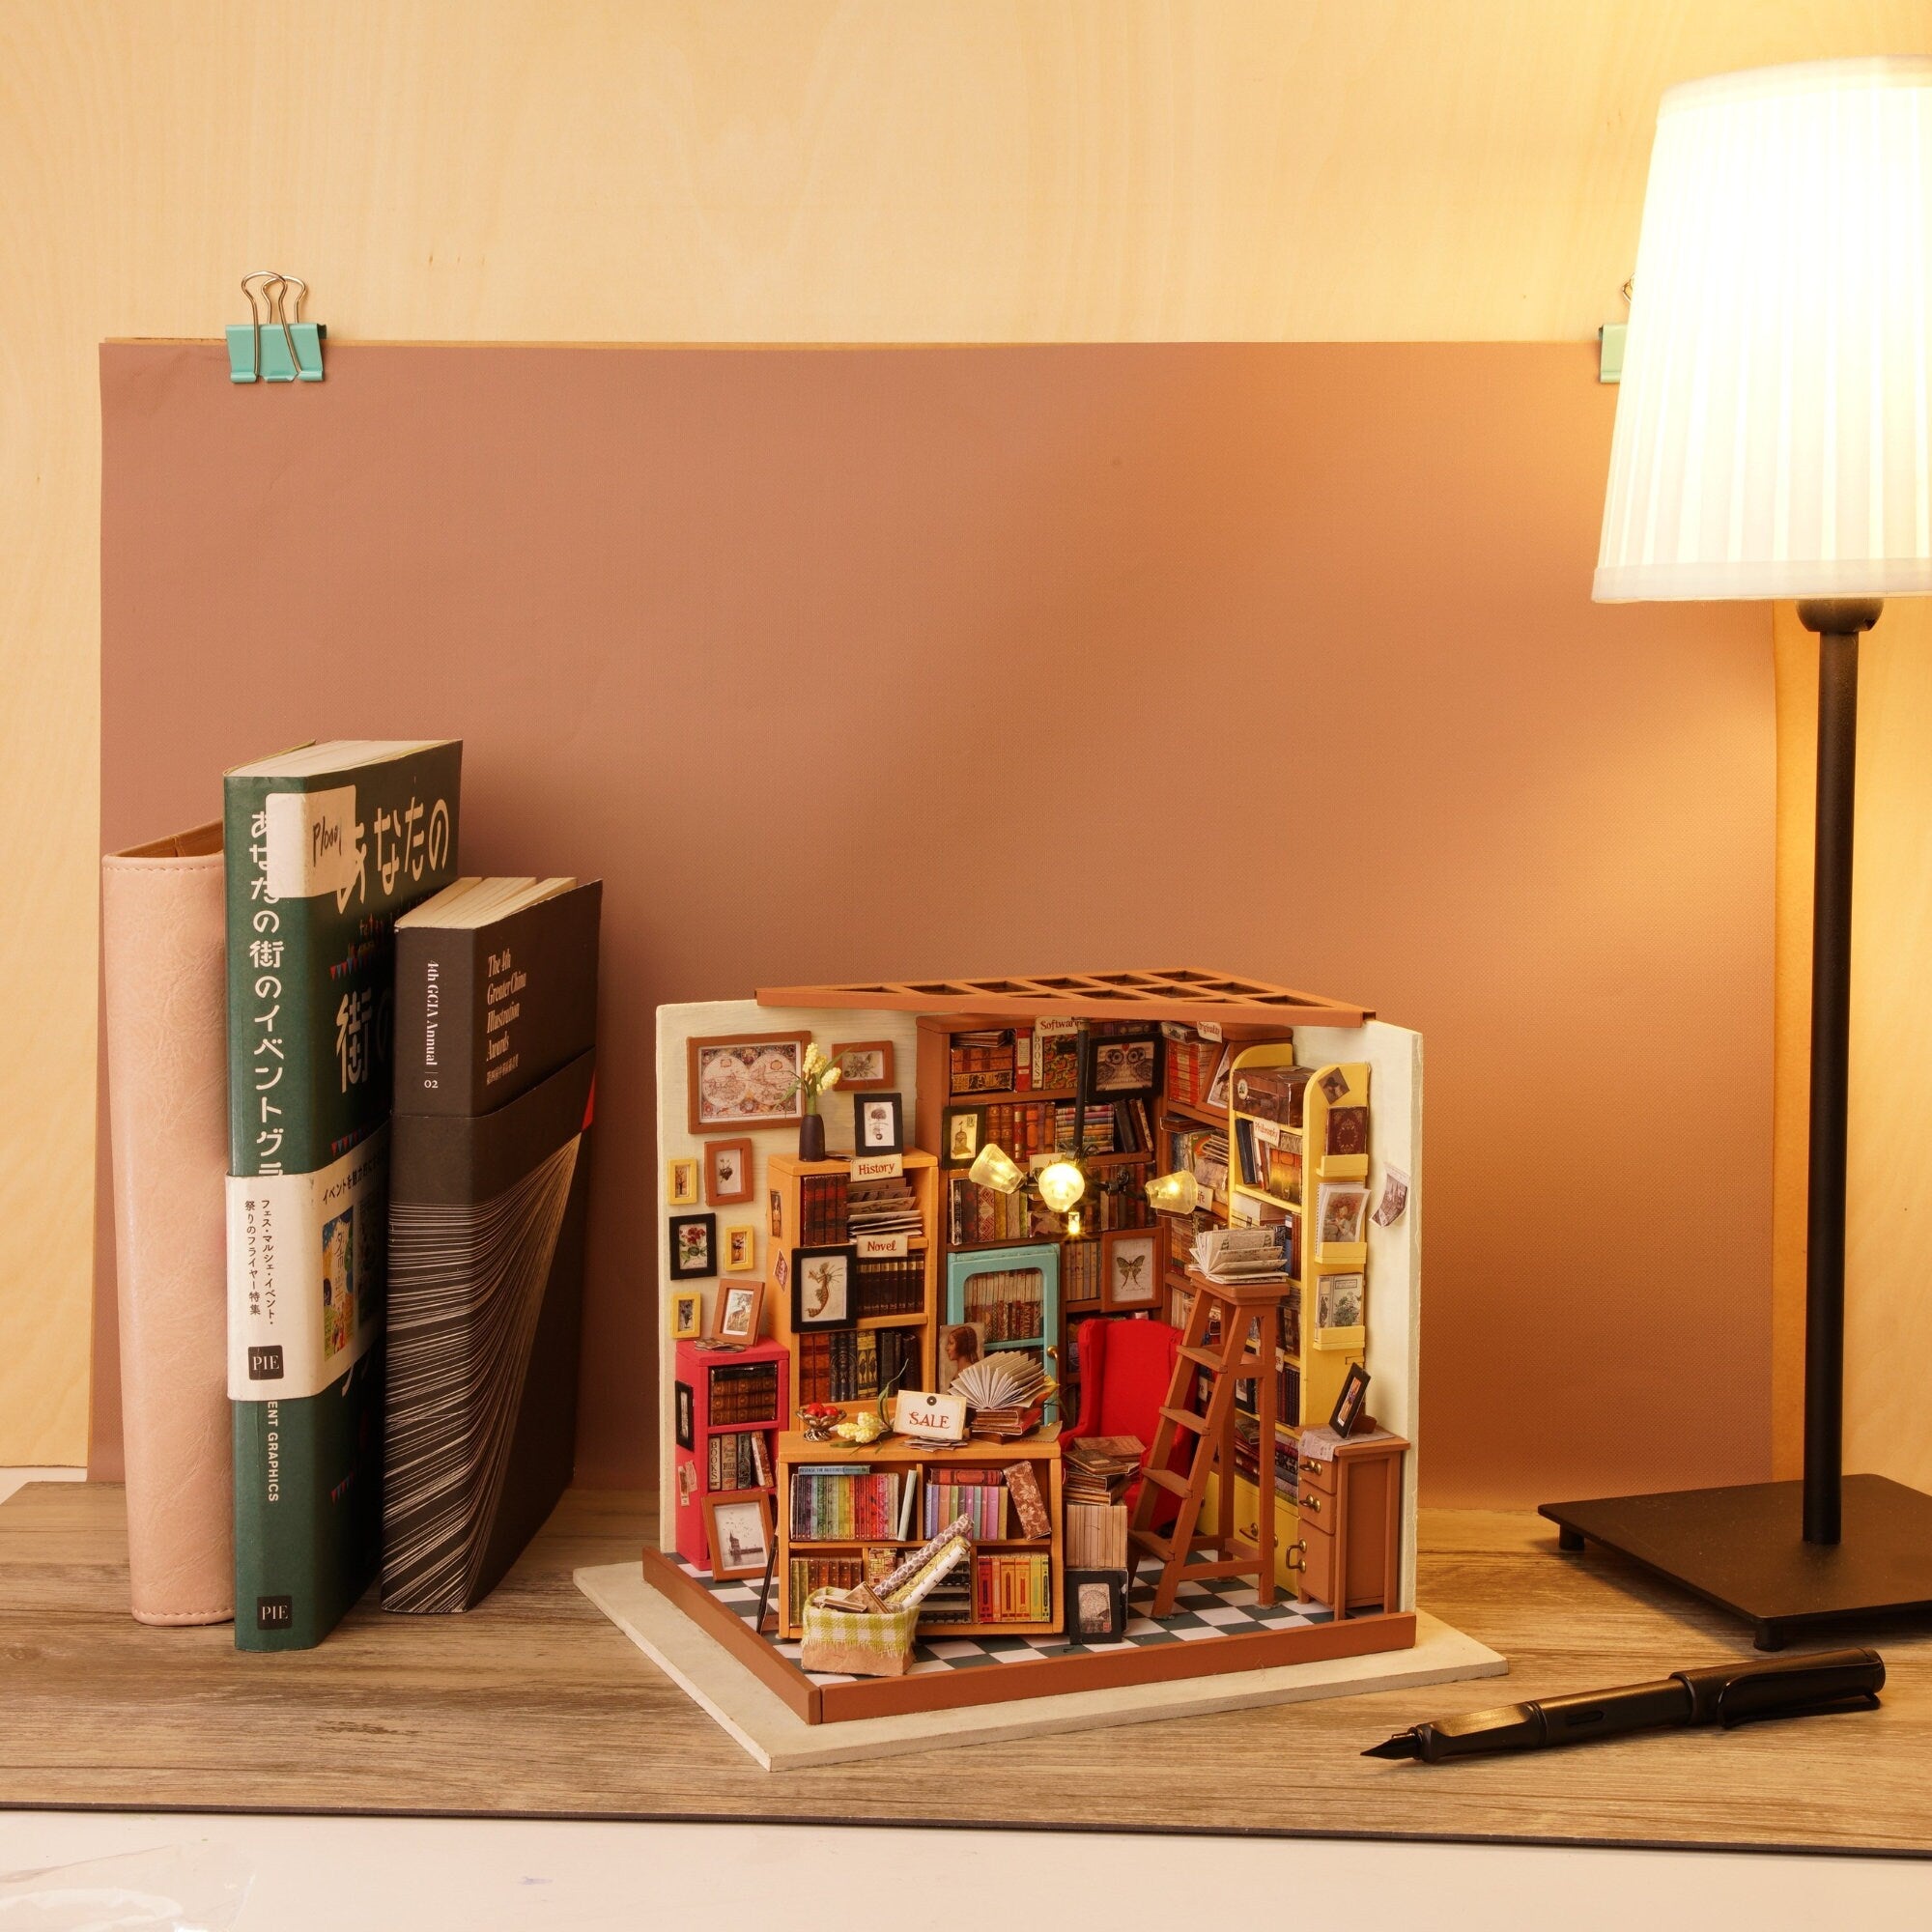 Sam's Study Library Miniature Dollhouse Kit with Furniature